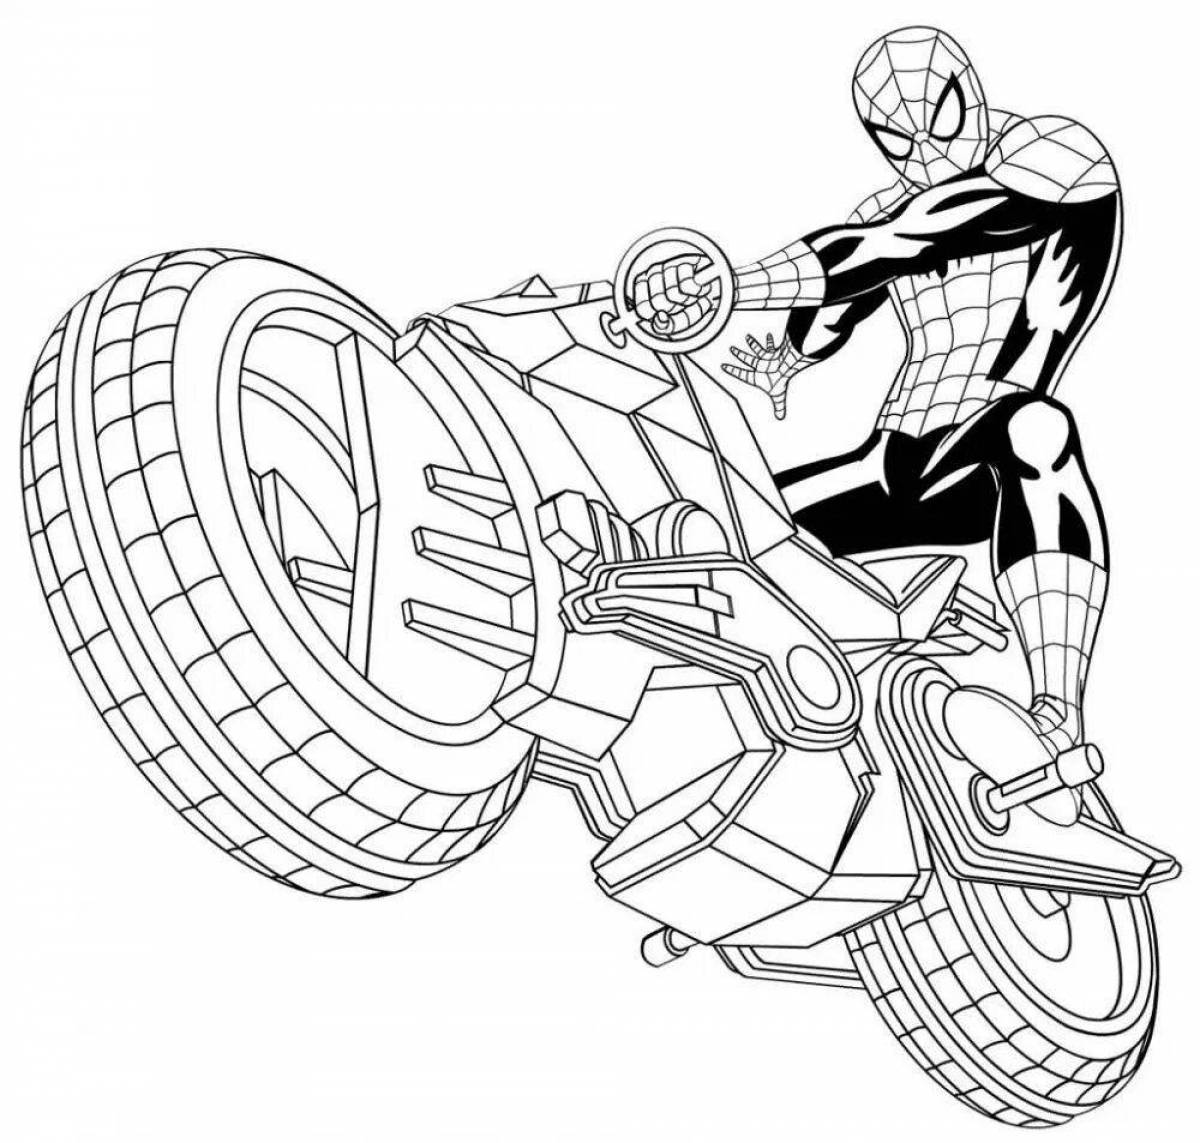 Playful baby spiderman coloring page